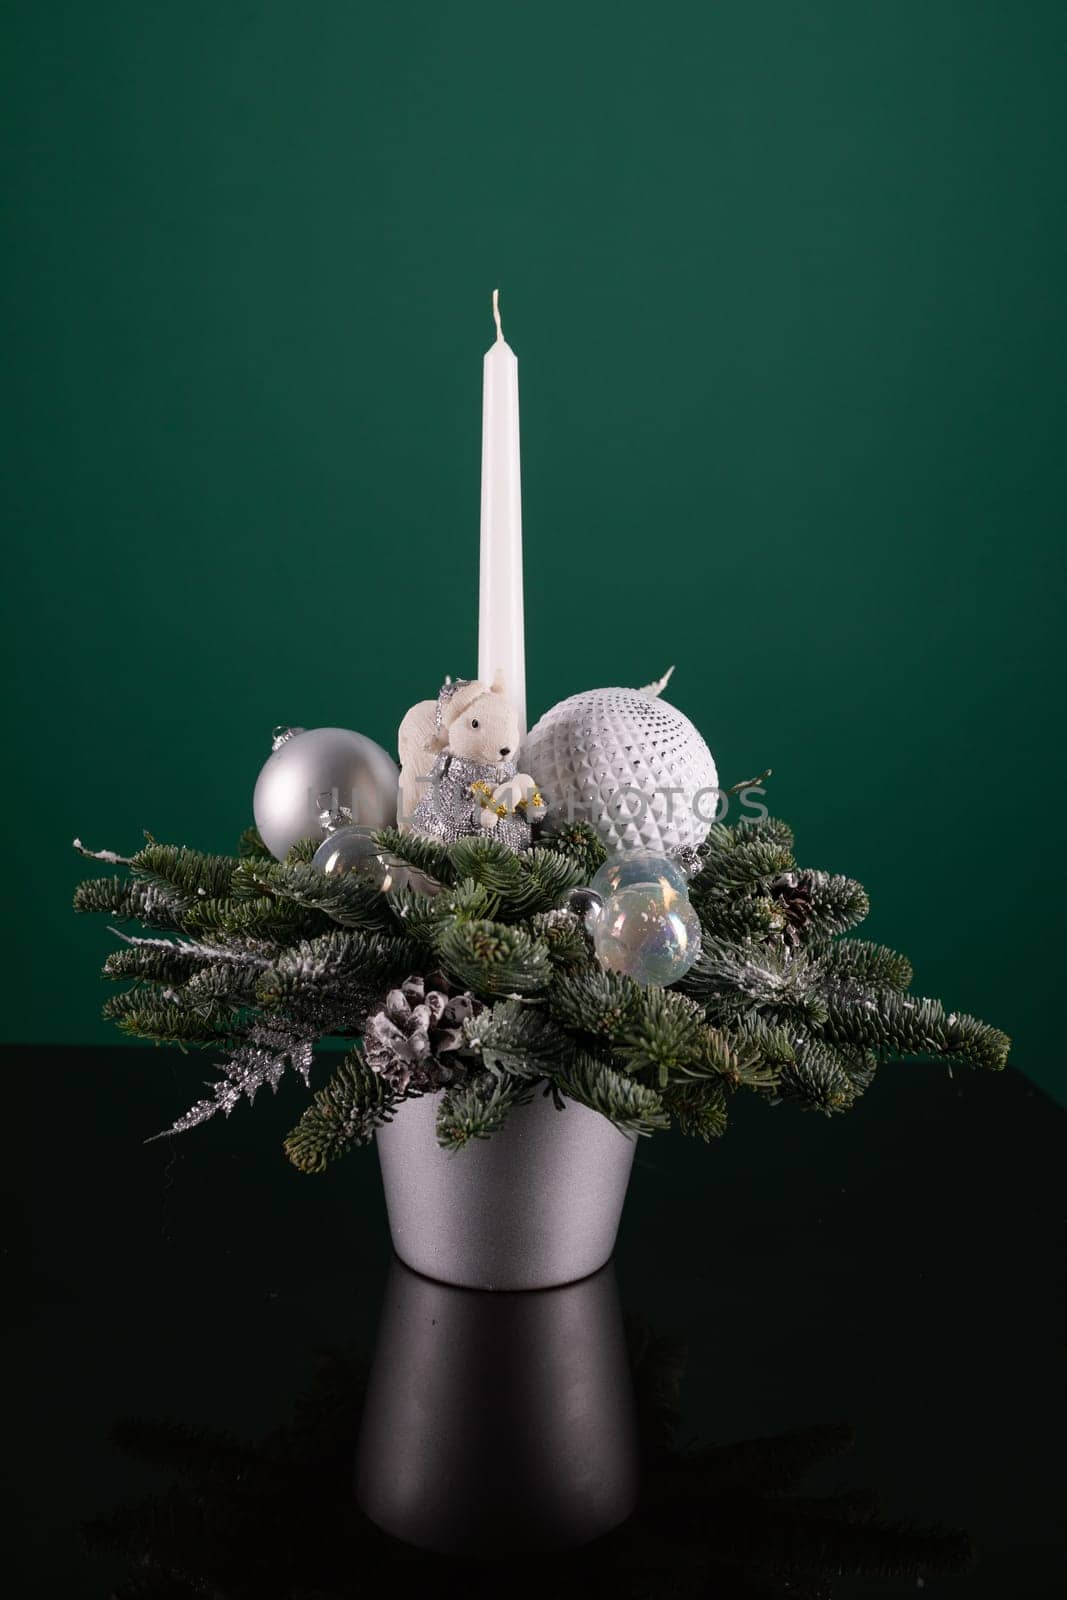 A white candle is placed neatly on top of a sturdy table surface. The candle appears unused, showing no signs of previous burning. Light reflects off the candles smooth surface, creating a simple yet elegant scene.